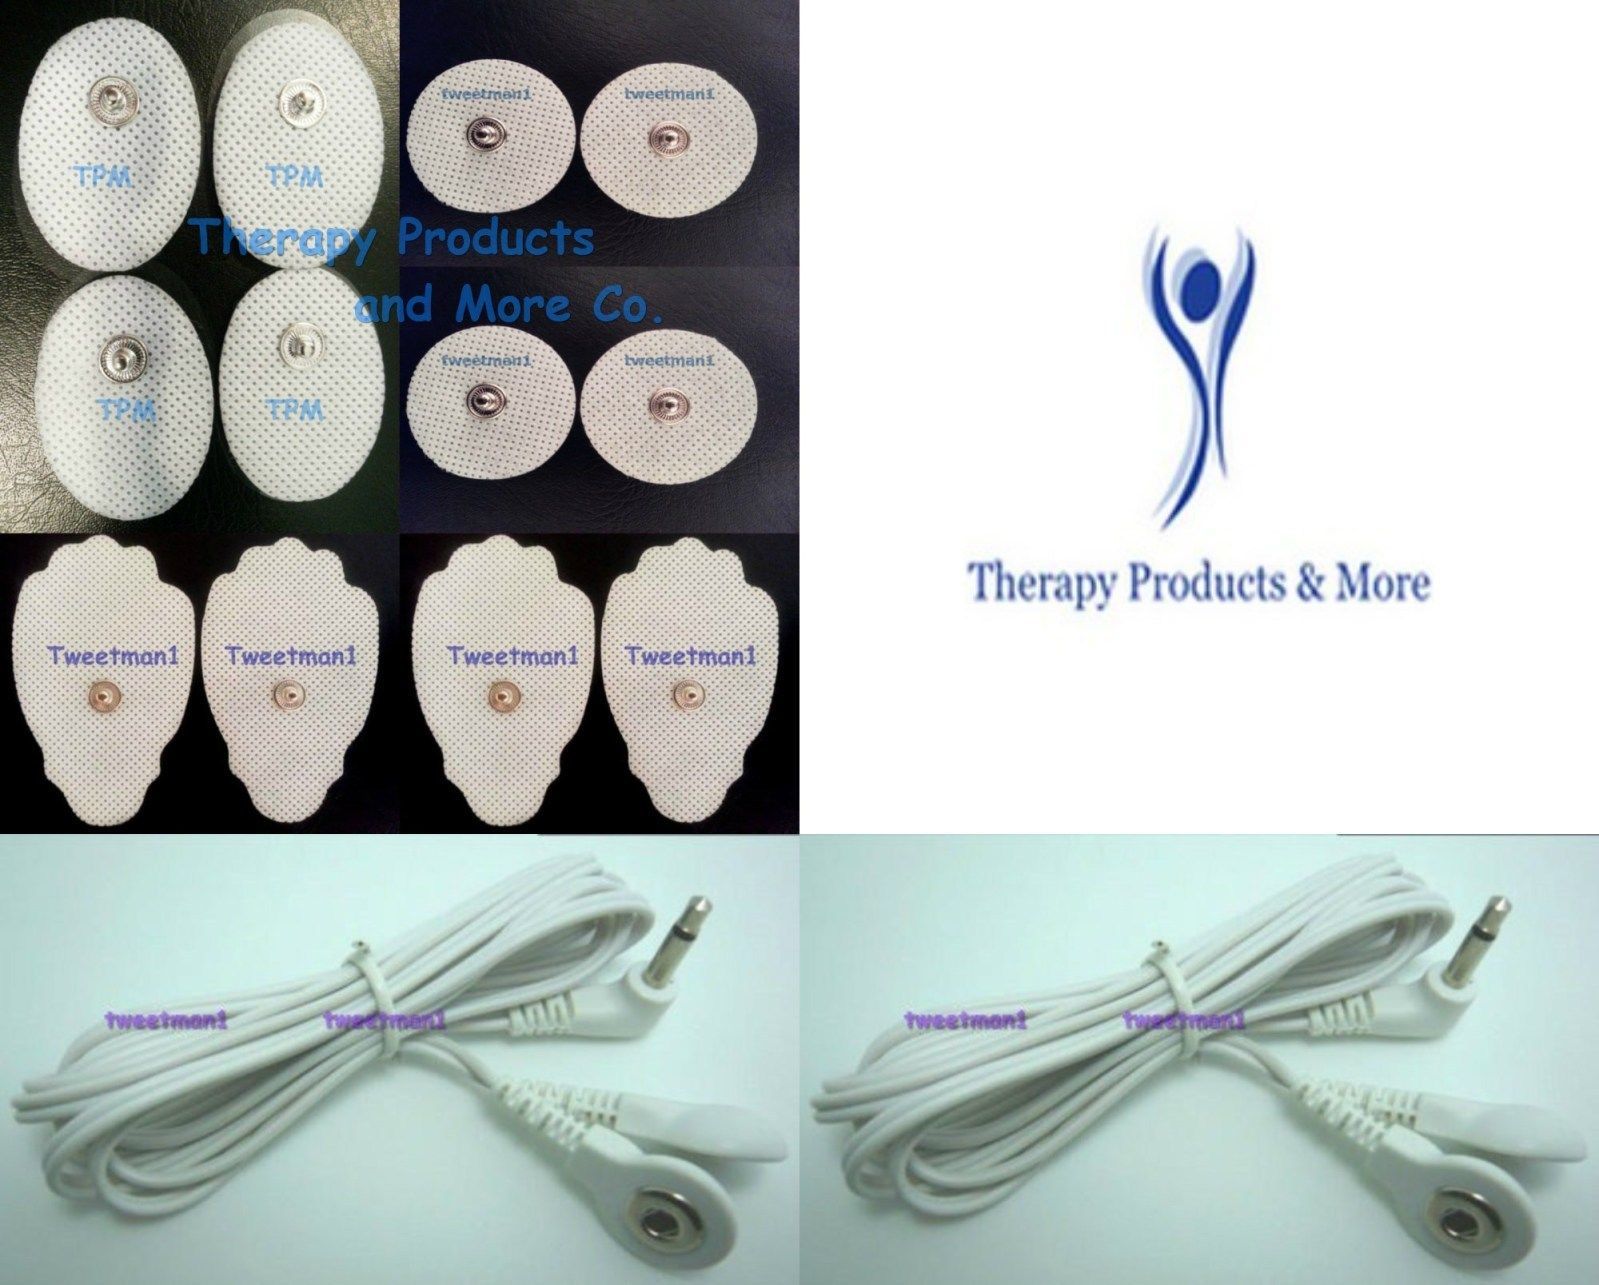 2 ELECTRODE LEAD CABLE(3.5mm Plug)+4LG+4SM OVAL+4SM PADS FOR IQ DIGITAL MASSAGER - $22.72